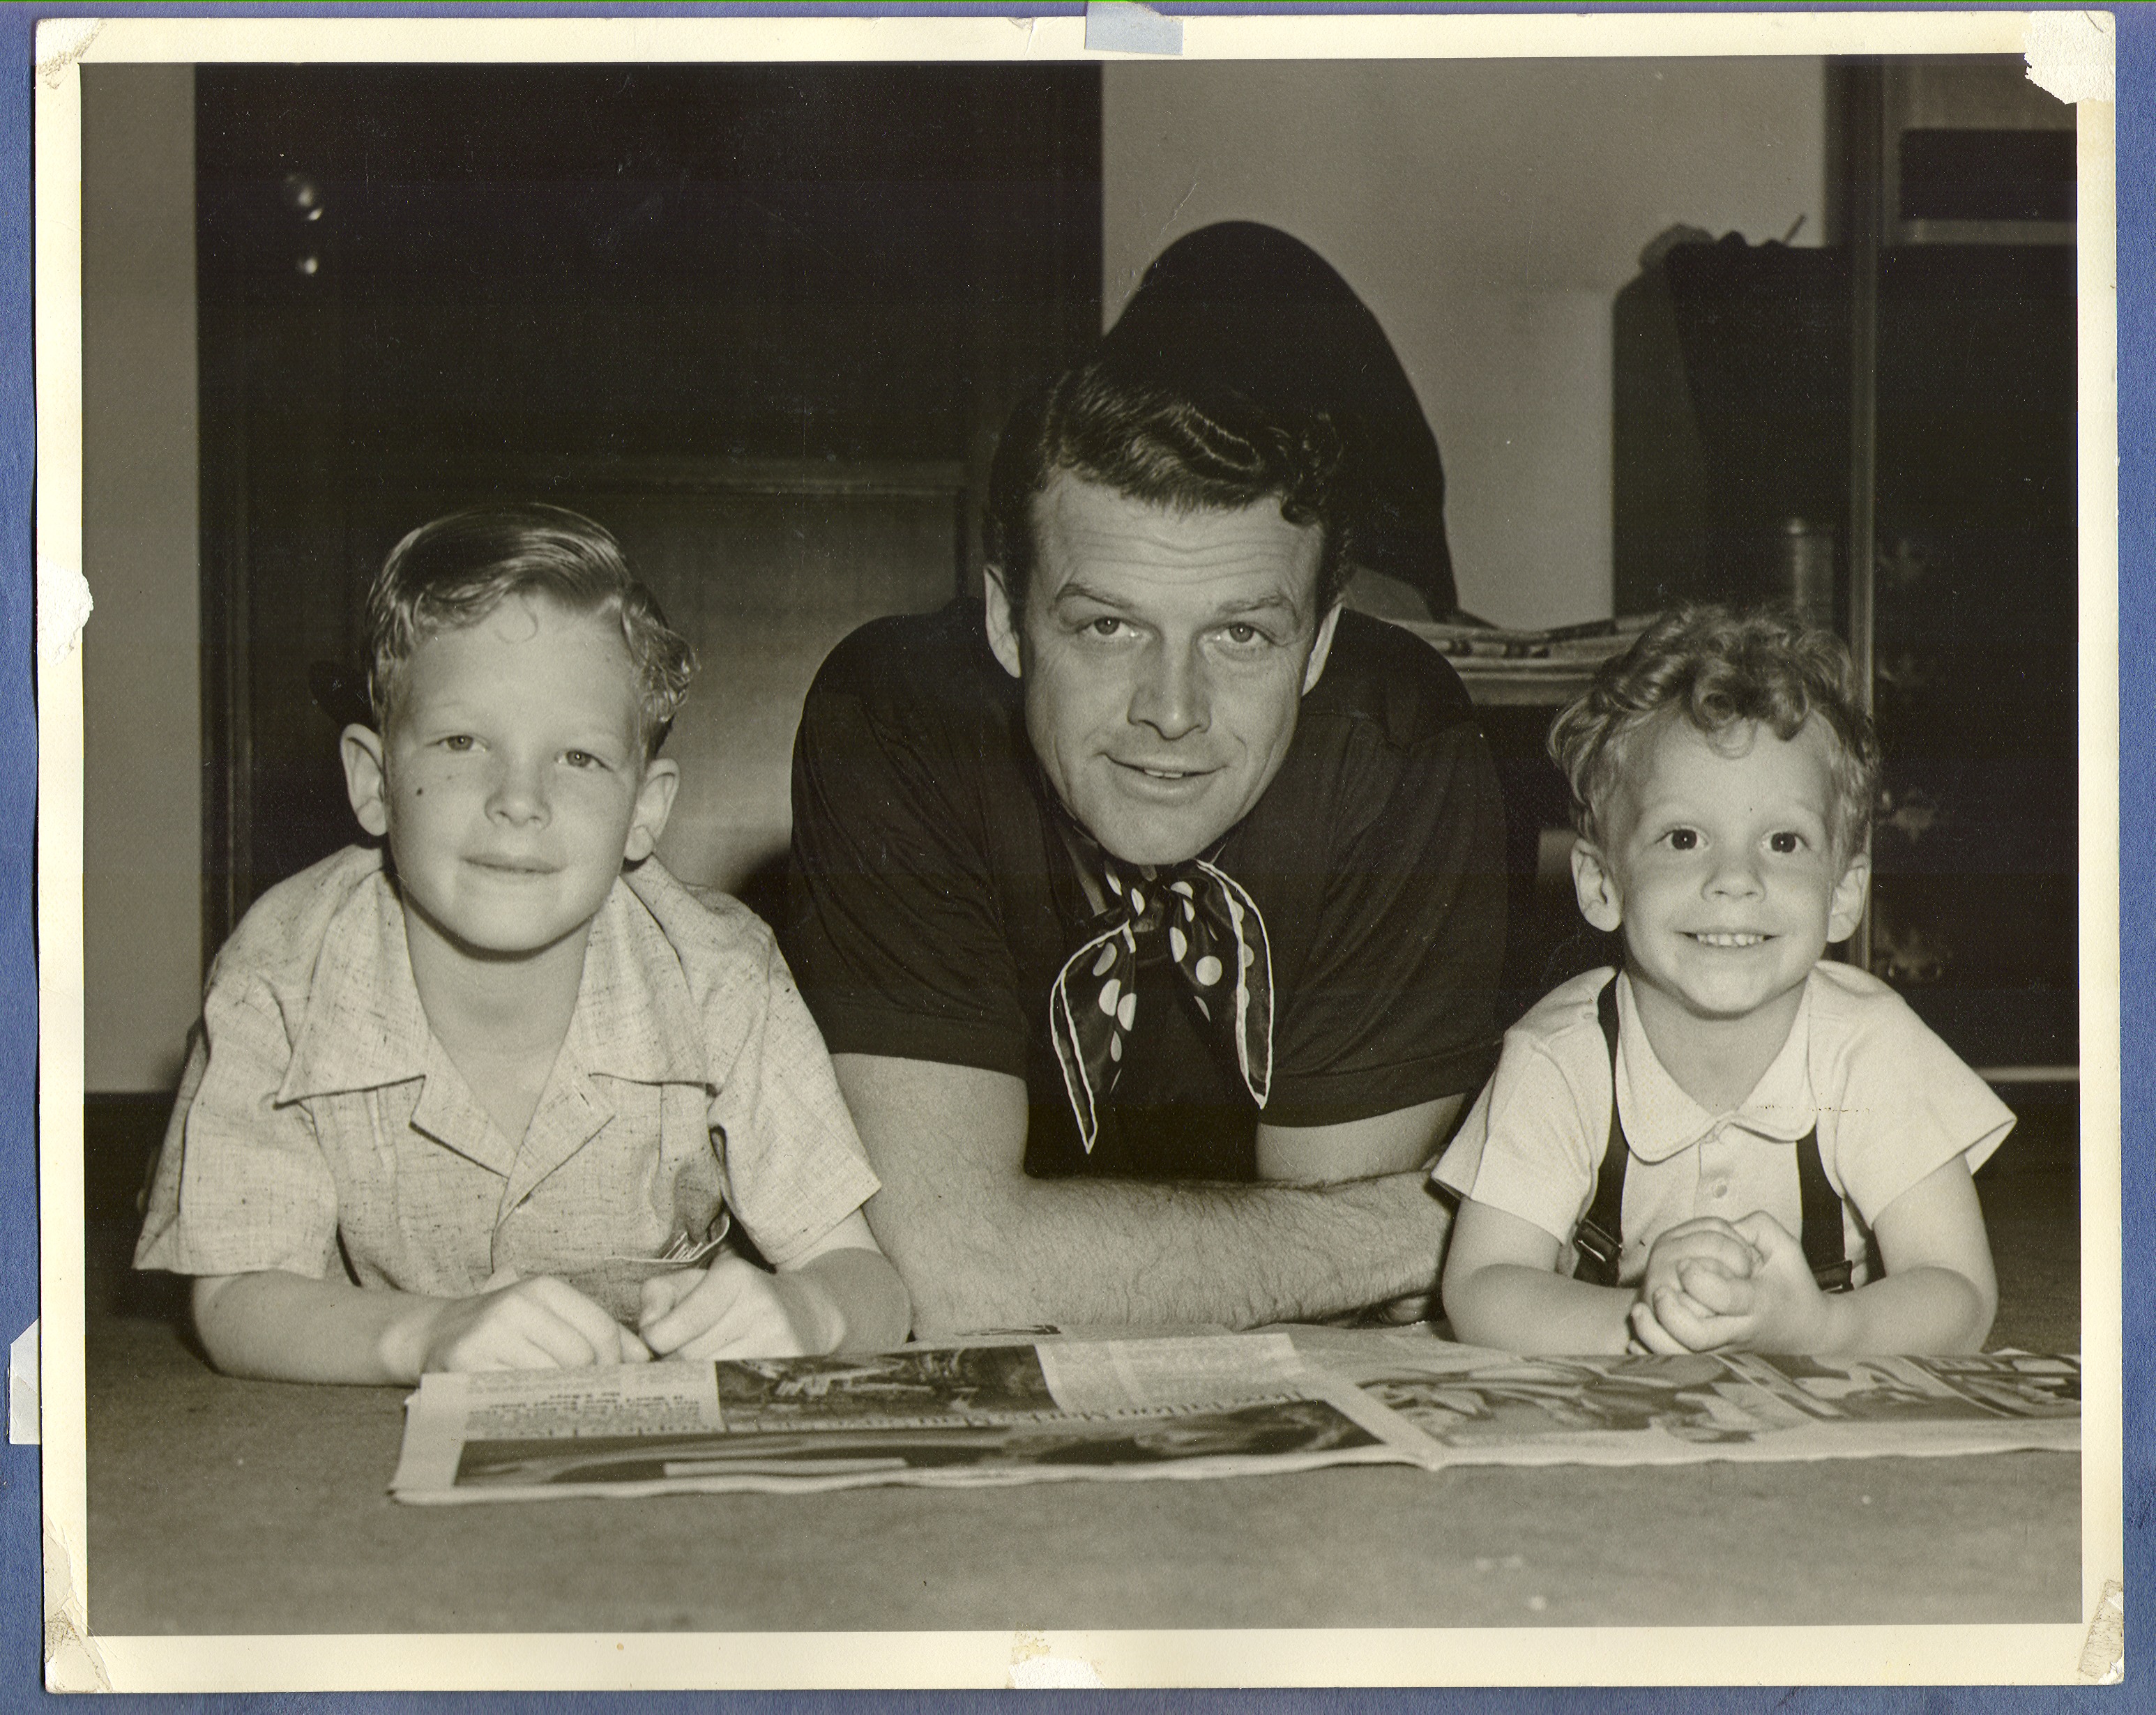 Rex Bell Jr., Rex Bell, and George Bell reading: photographic print